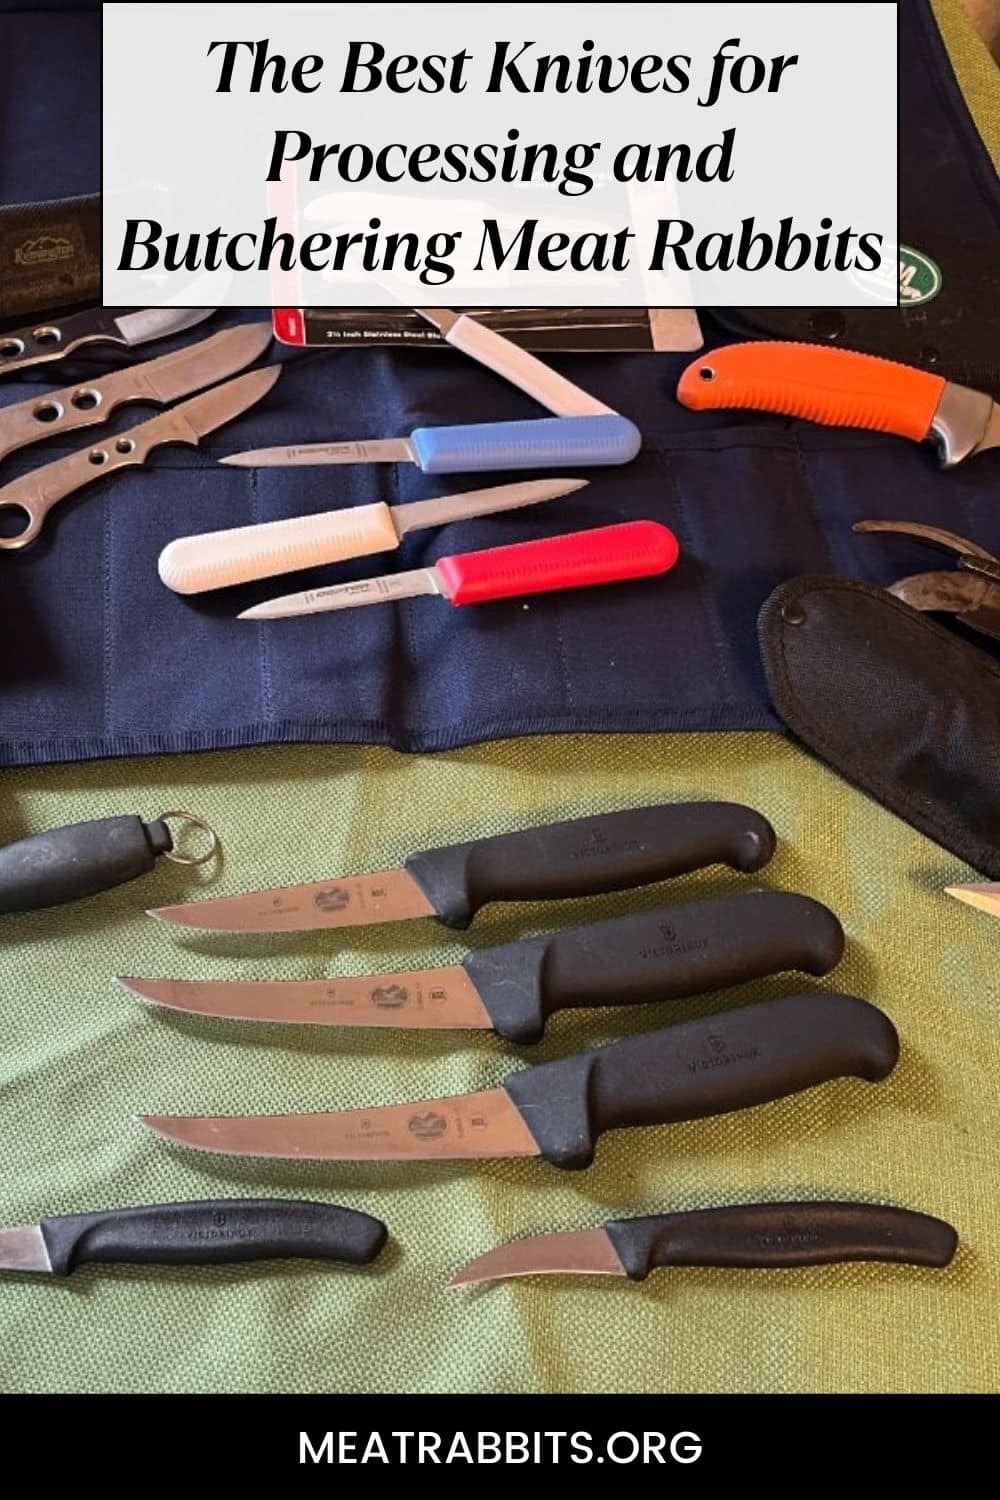 The Best Knives for Processing and Butchering Meat Rabbits pinterest image.